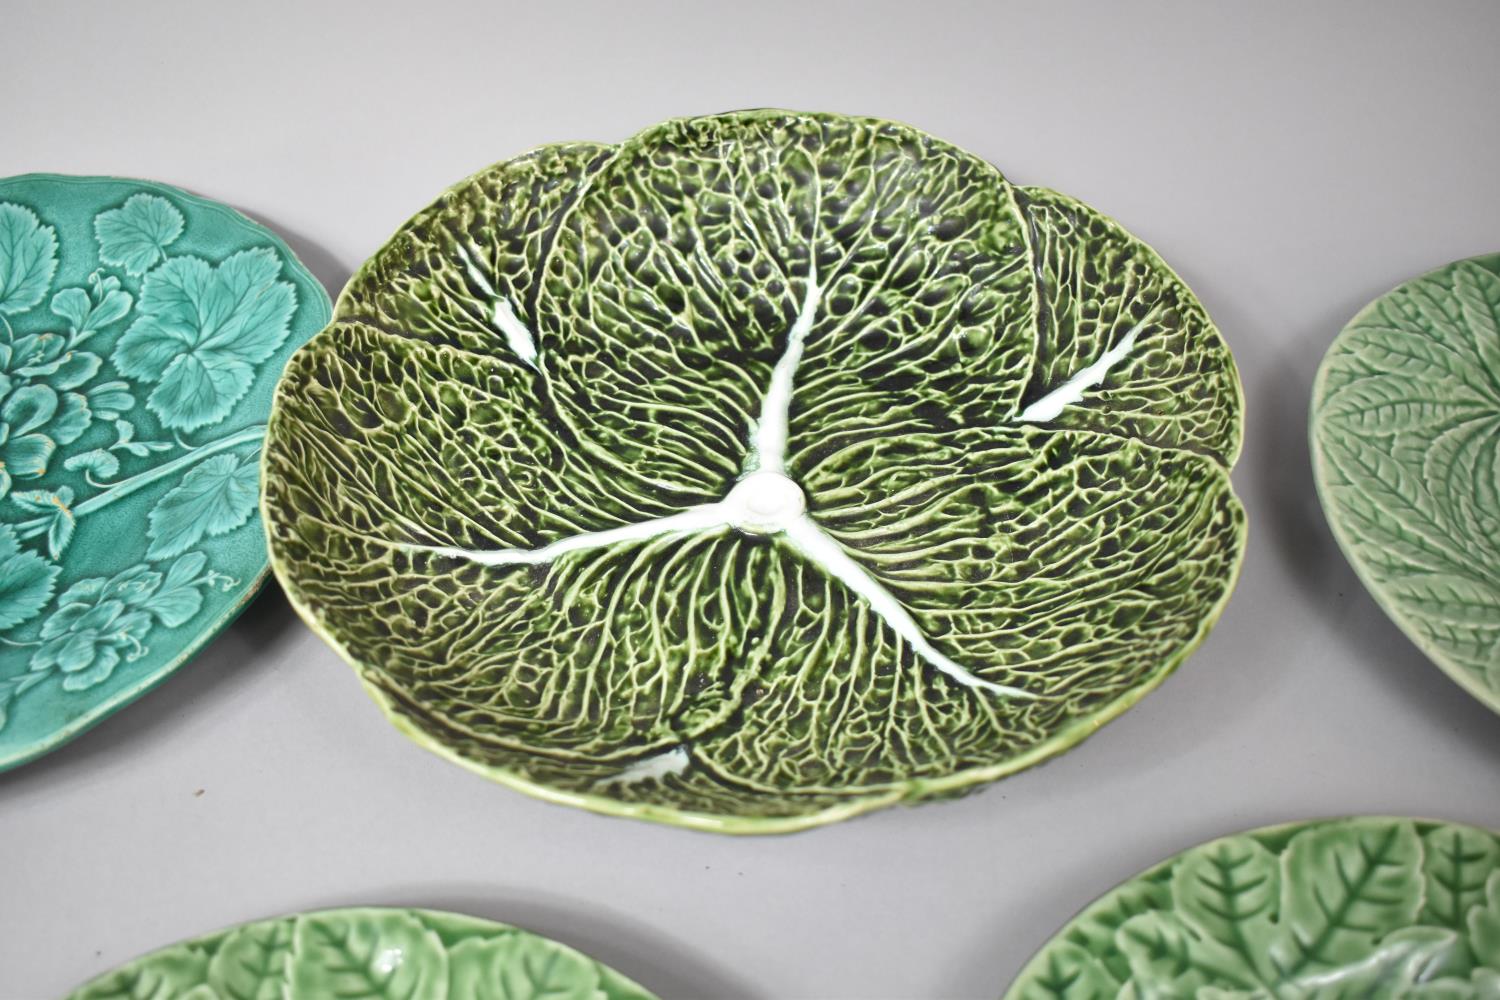 A Collection of Portuguese Leaf Dishes and Plates - Image 2 of 3